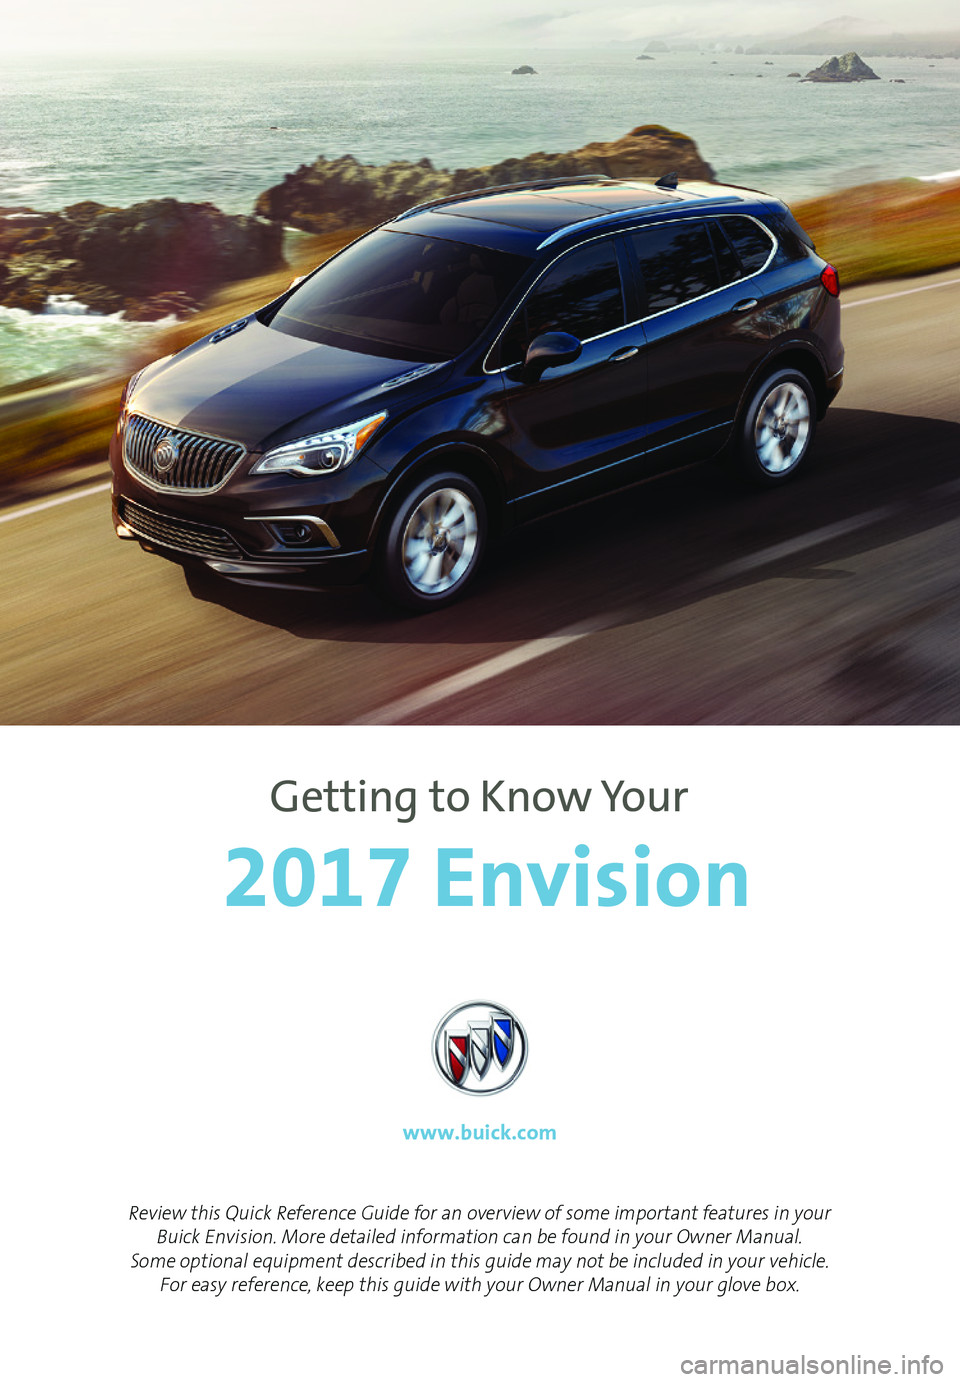 BUICK ENVISION 2017  Get To Know Guide 